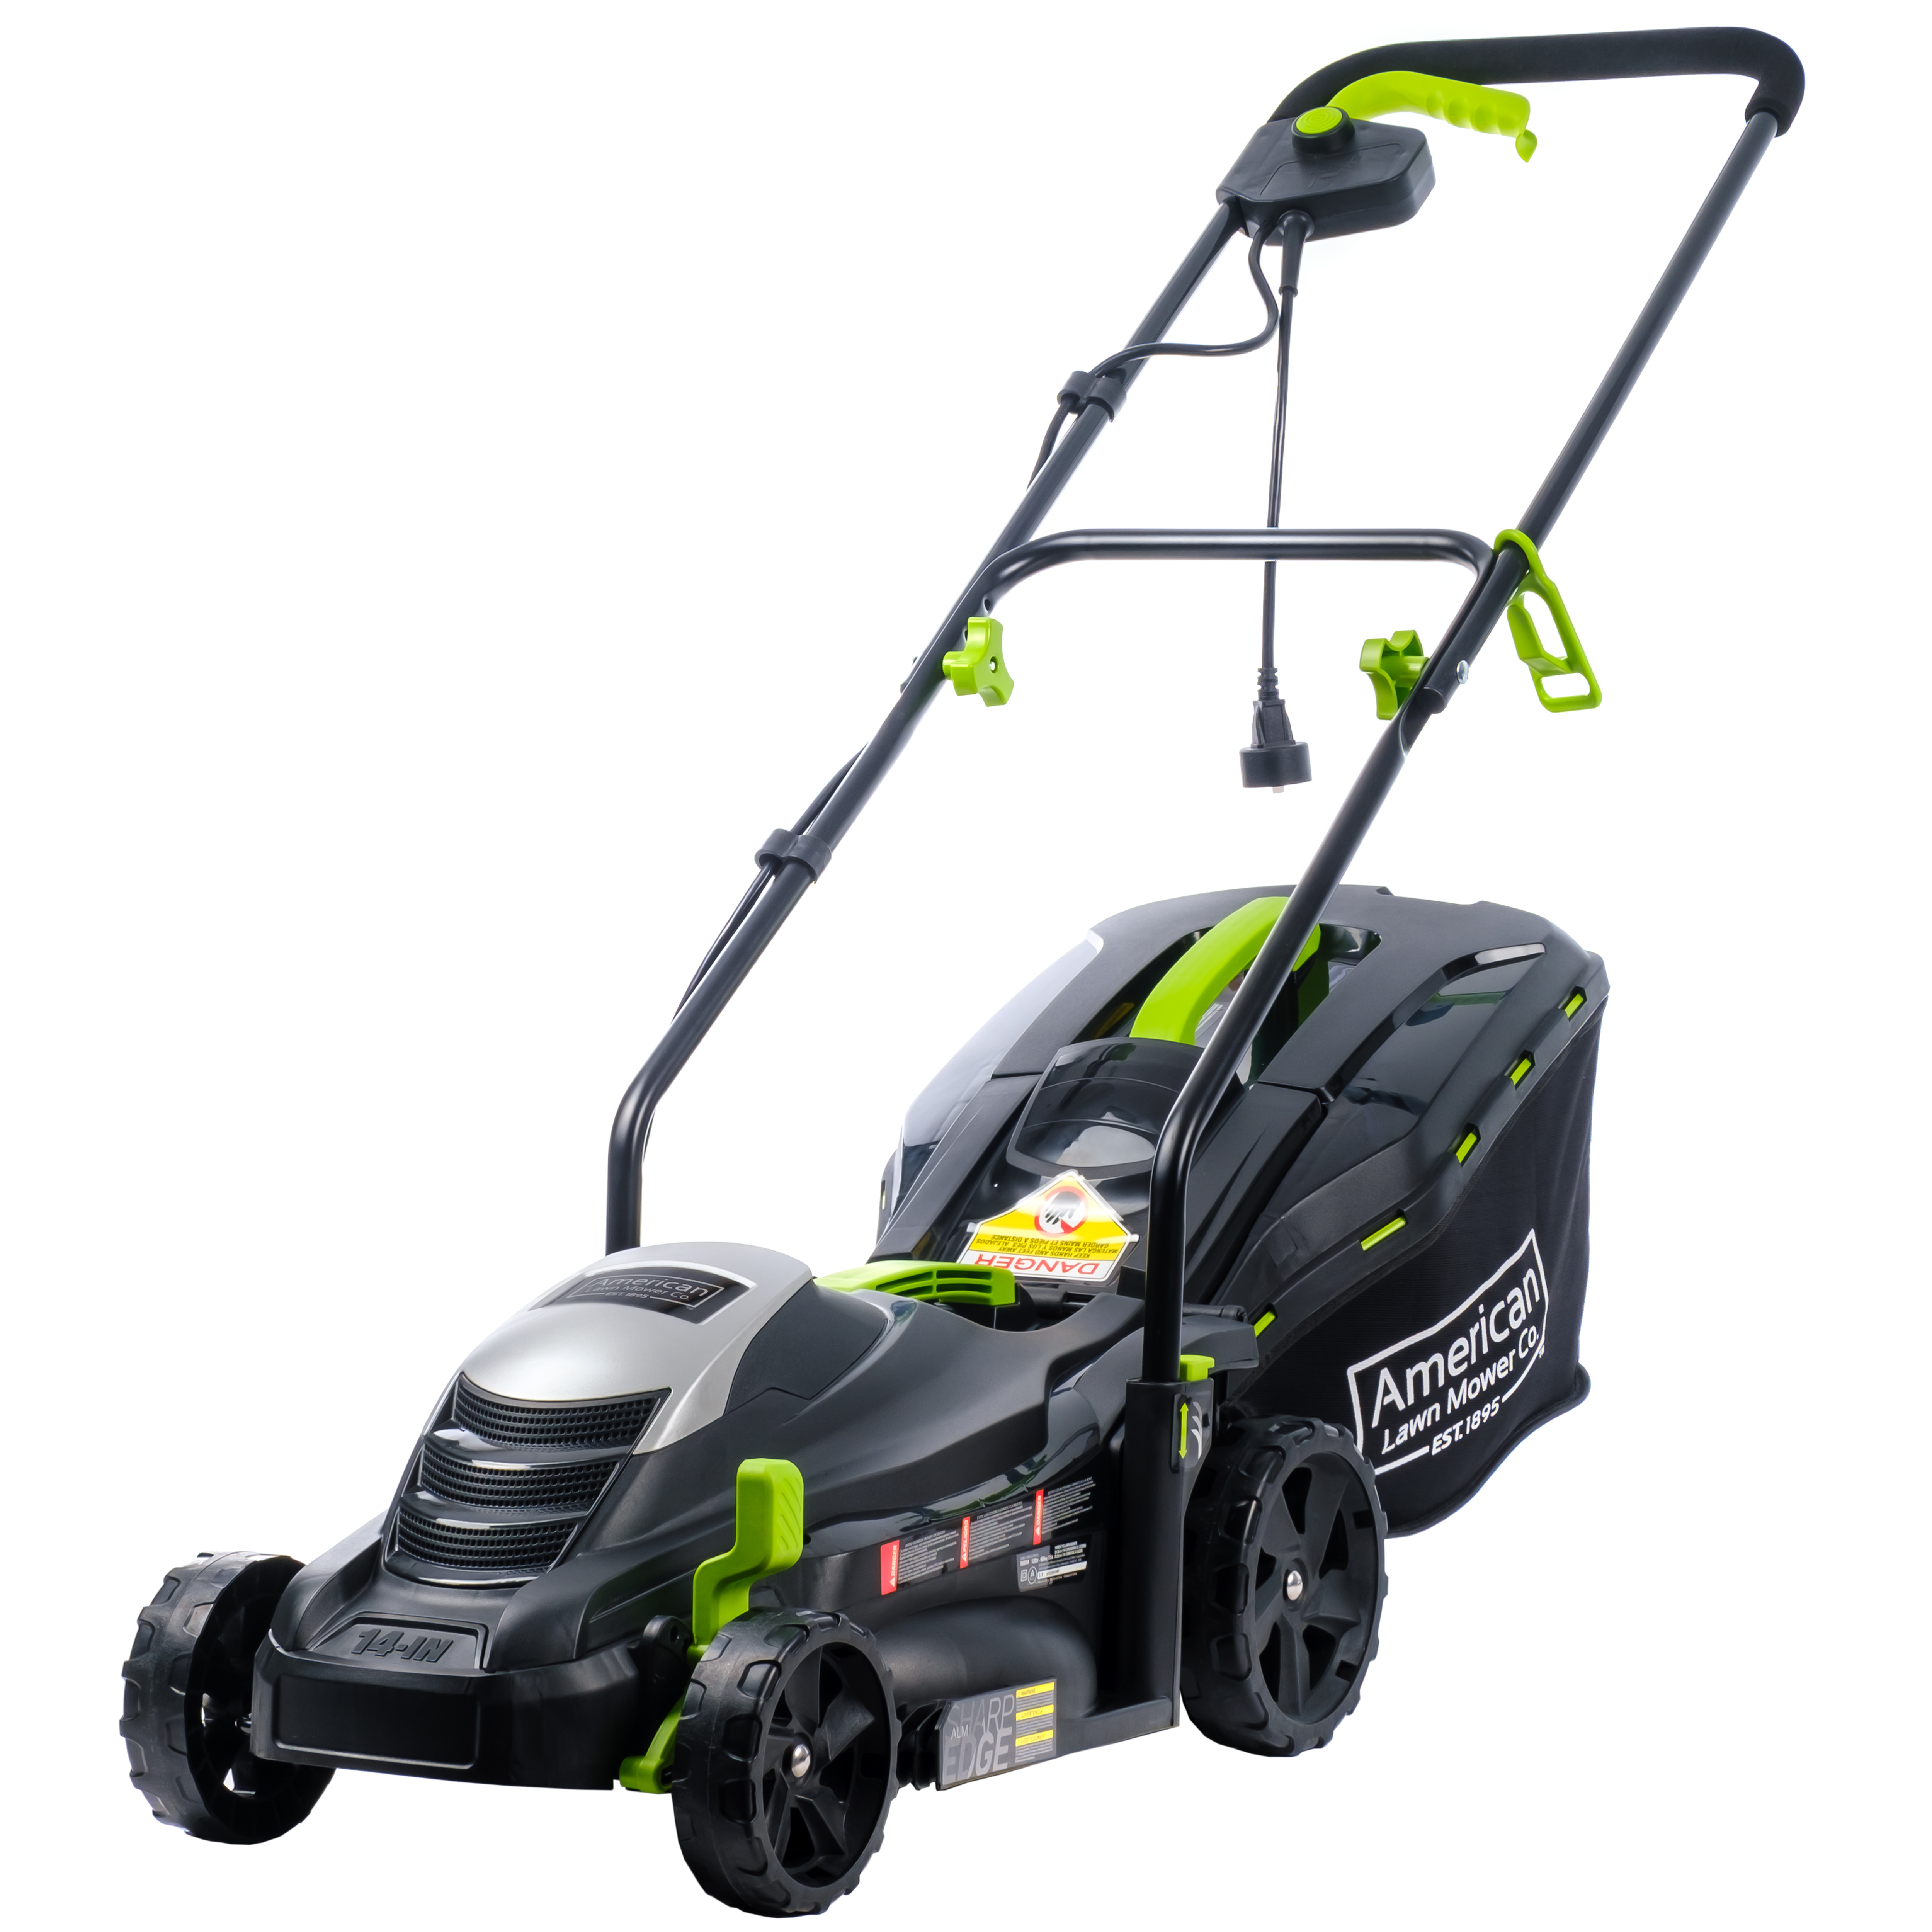 American Lawn Mower 50514 14" Corded Electric Lawn Mower - image 1 of 4